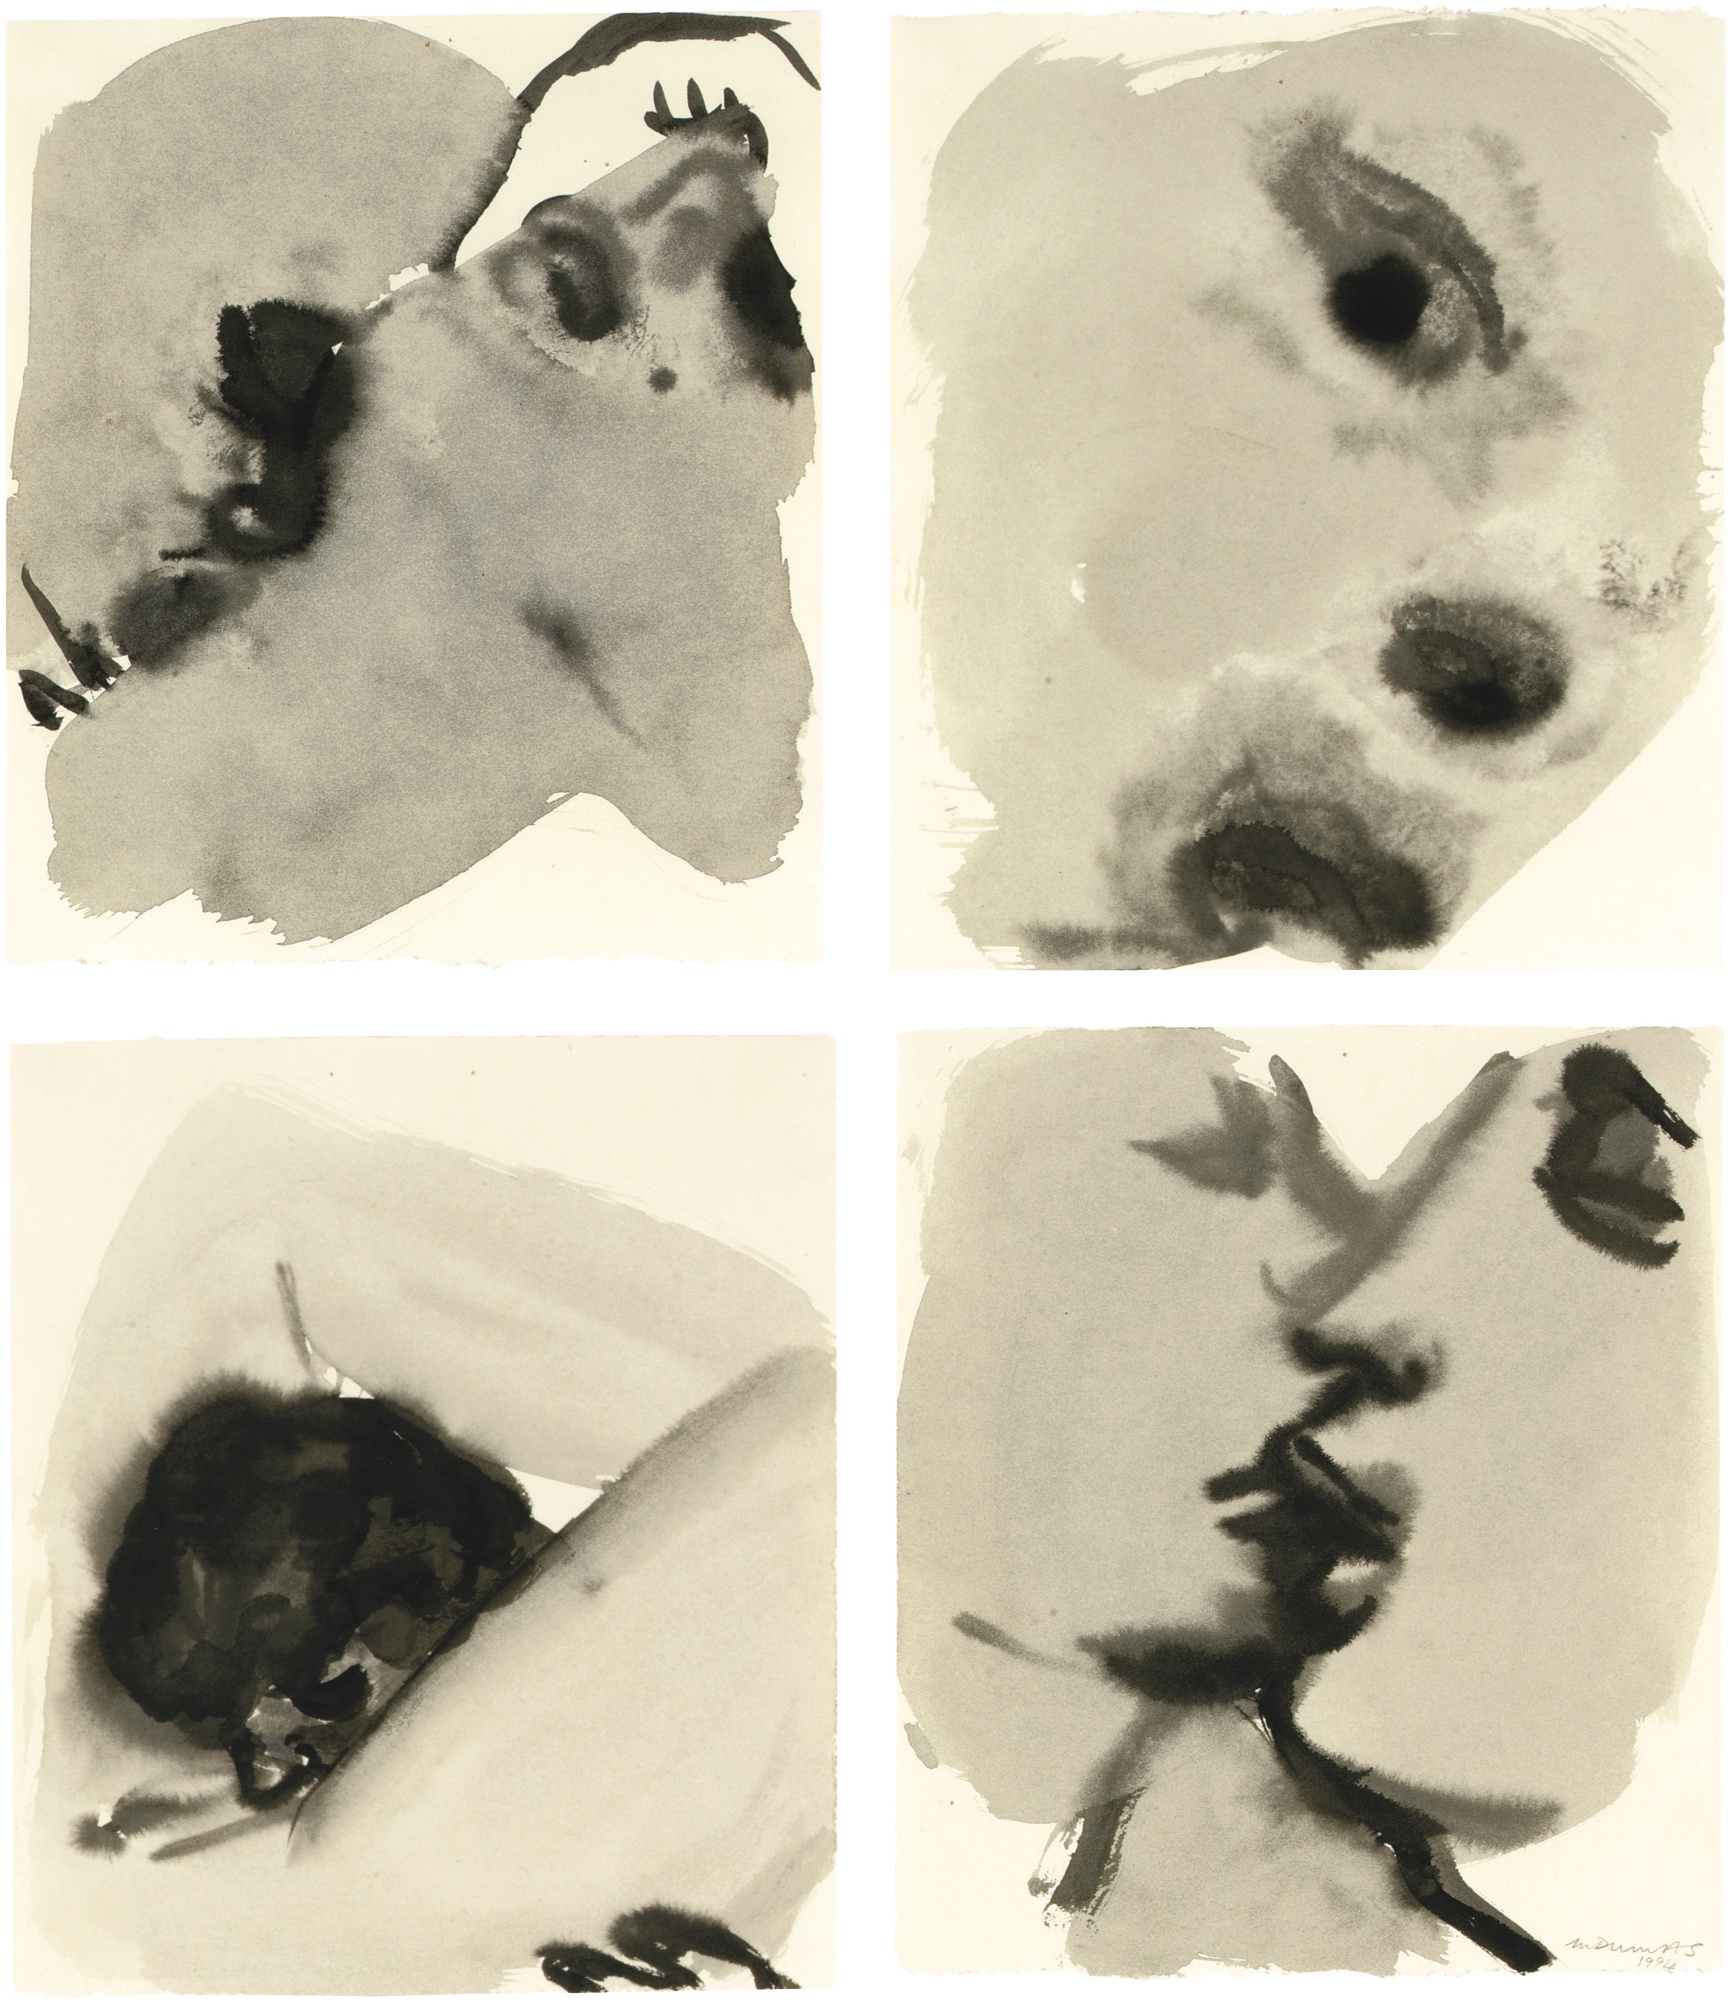 Kissing (1994) by Marlene Dumas, lot No 12 in Sotheby's forthcoming sale